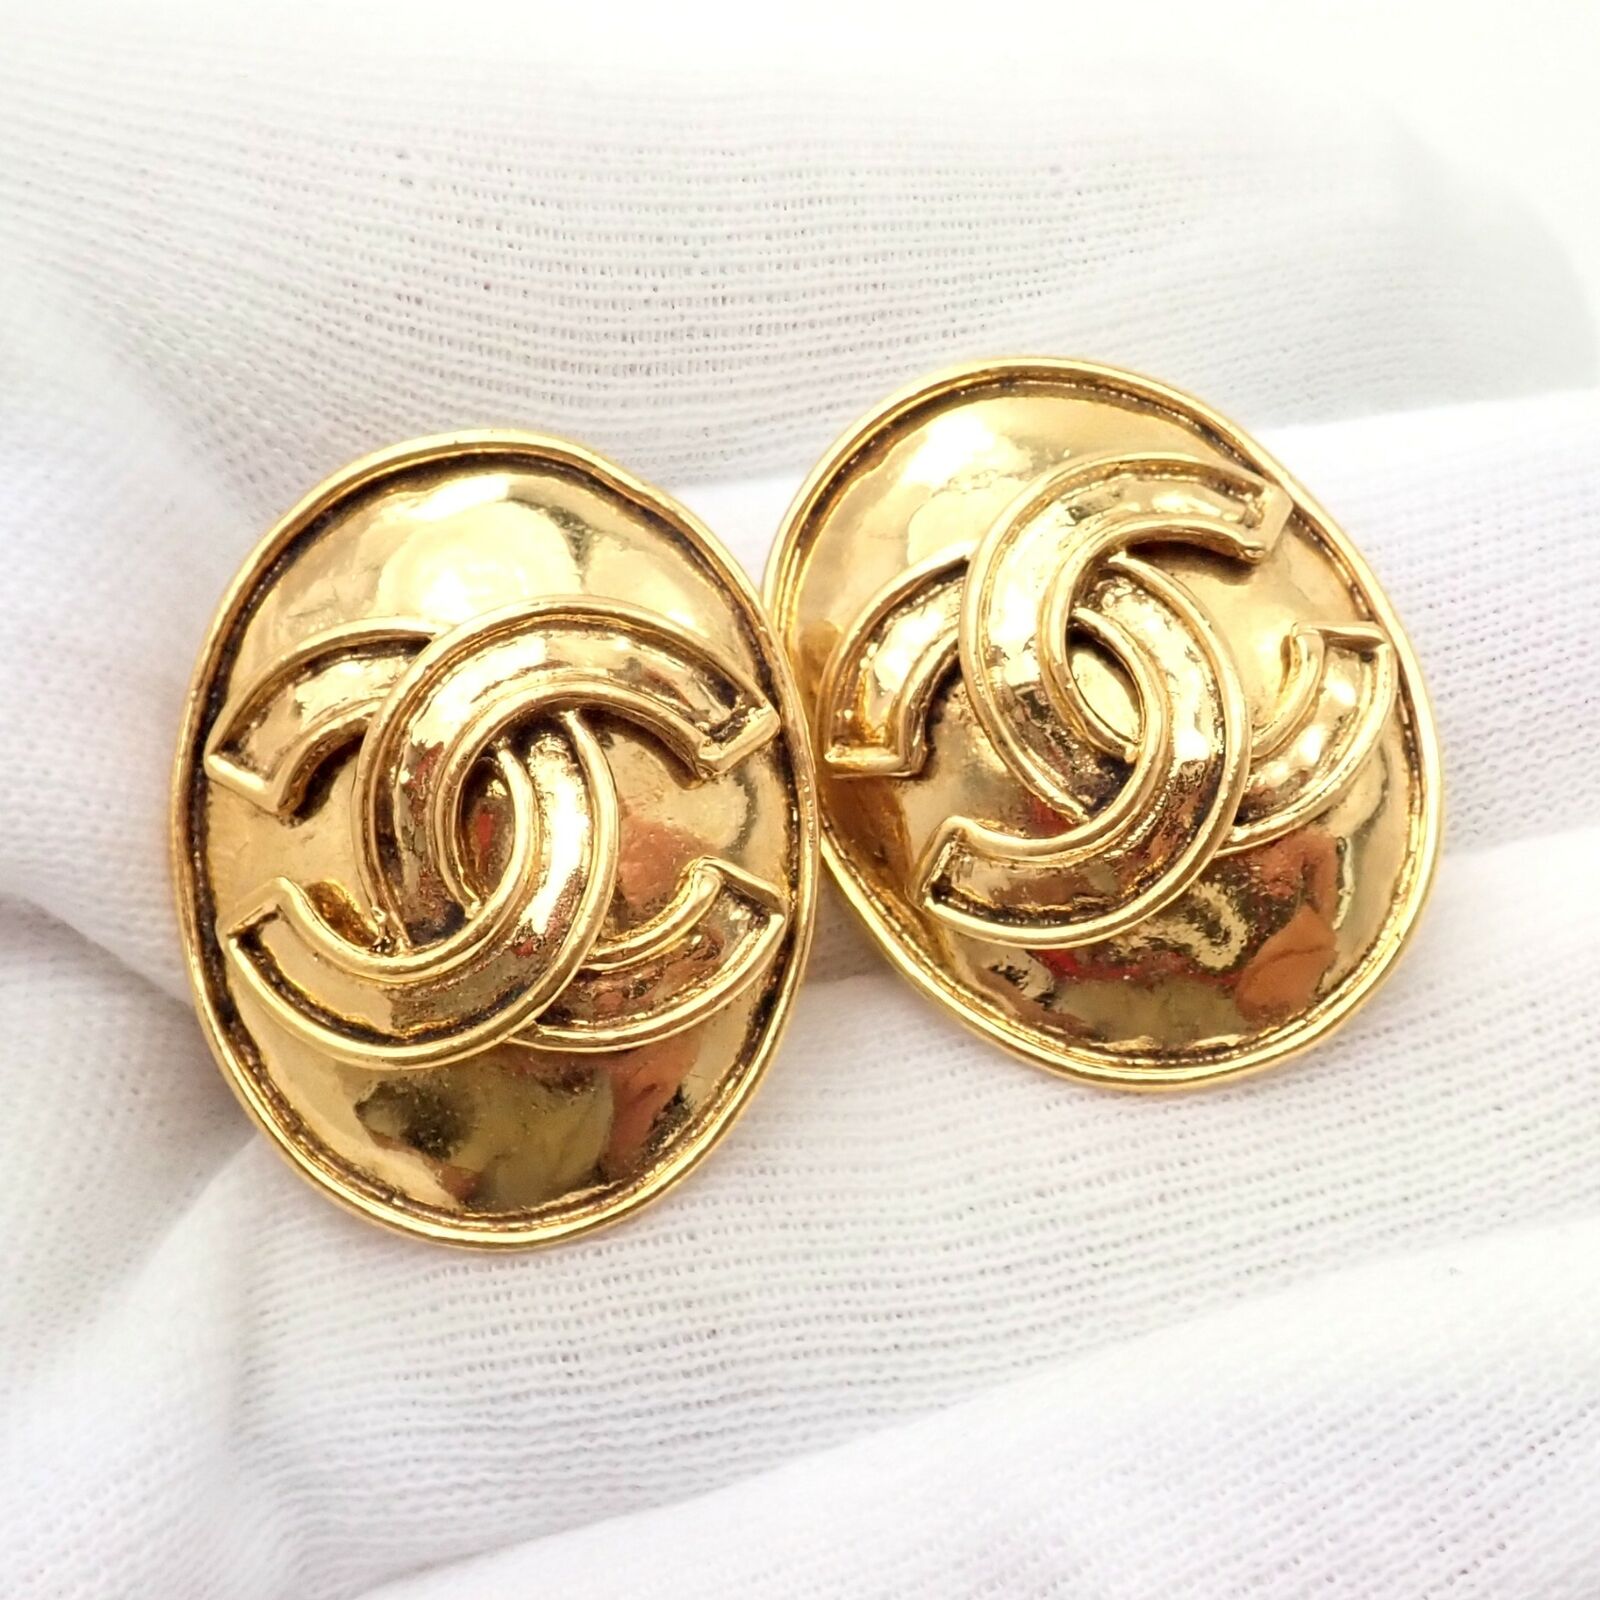 Chanel Jewelry & Watches:Fashion Jewelry:Earrings Rare! Vintage Chanel Paris France Logo Earrings 1994 Spring Collection